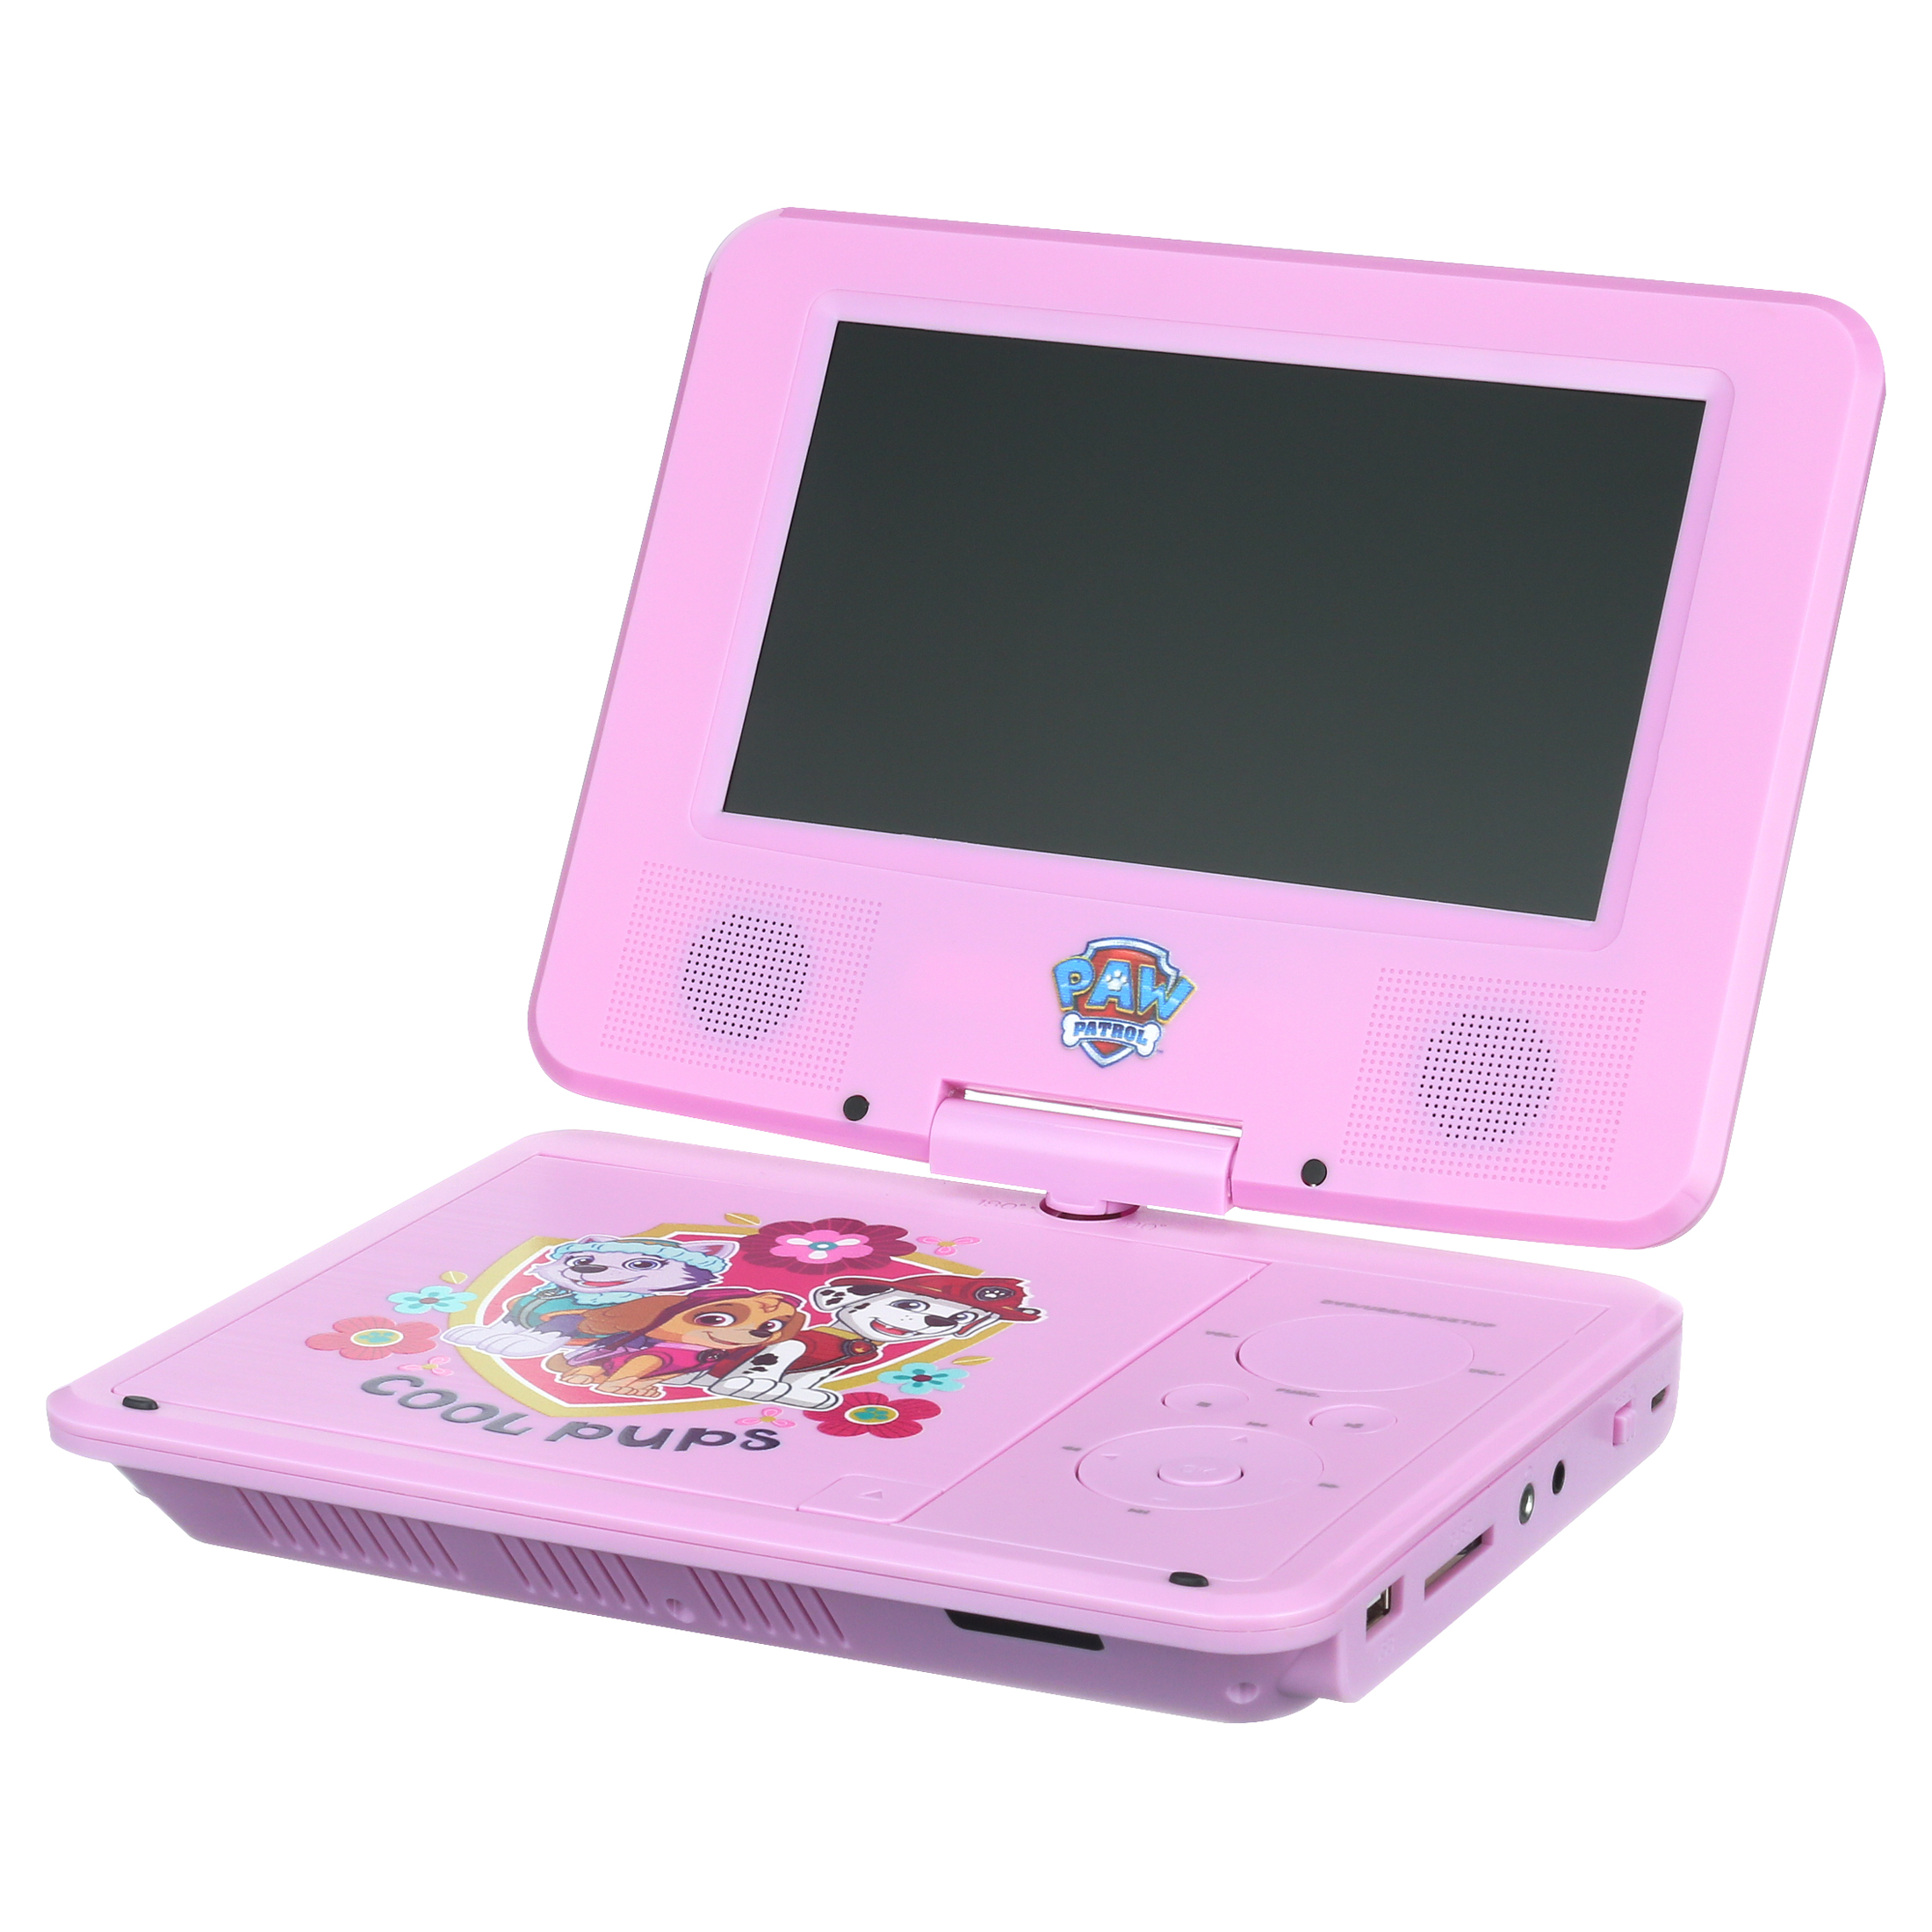 PAW Patrol 7" Portable DVD Player with Carrying Bag and Headphones, Pink - image 3 of 7